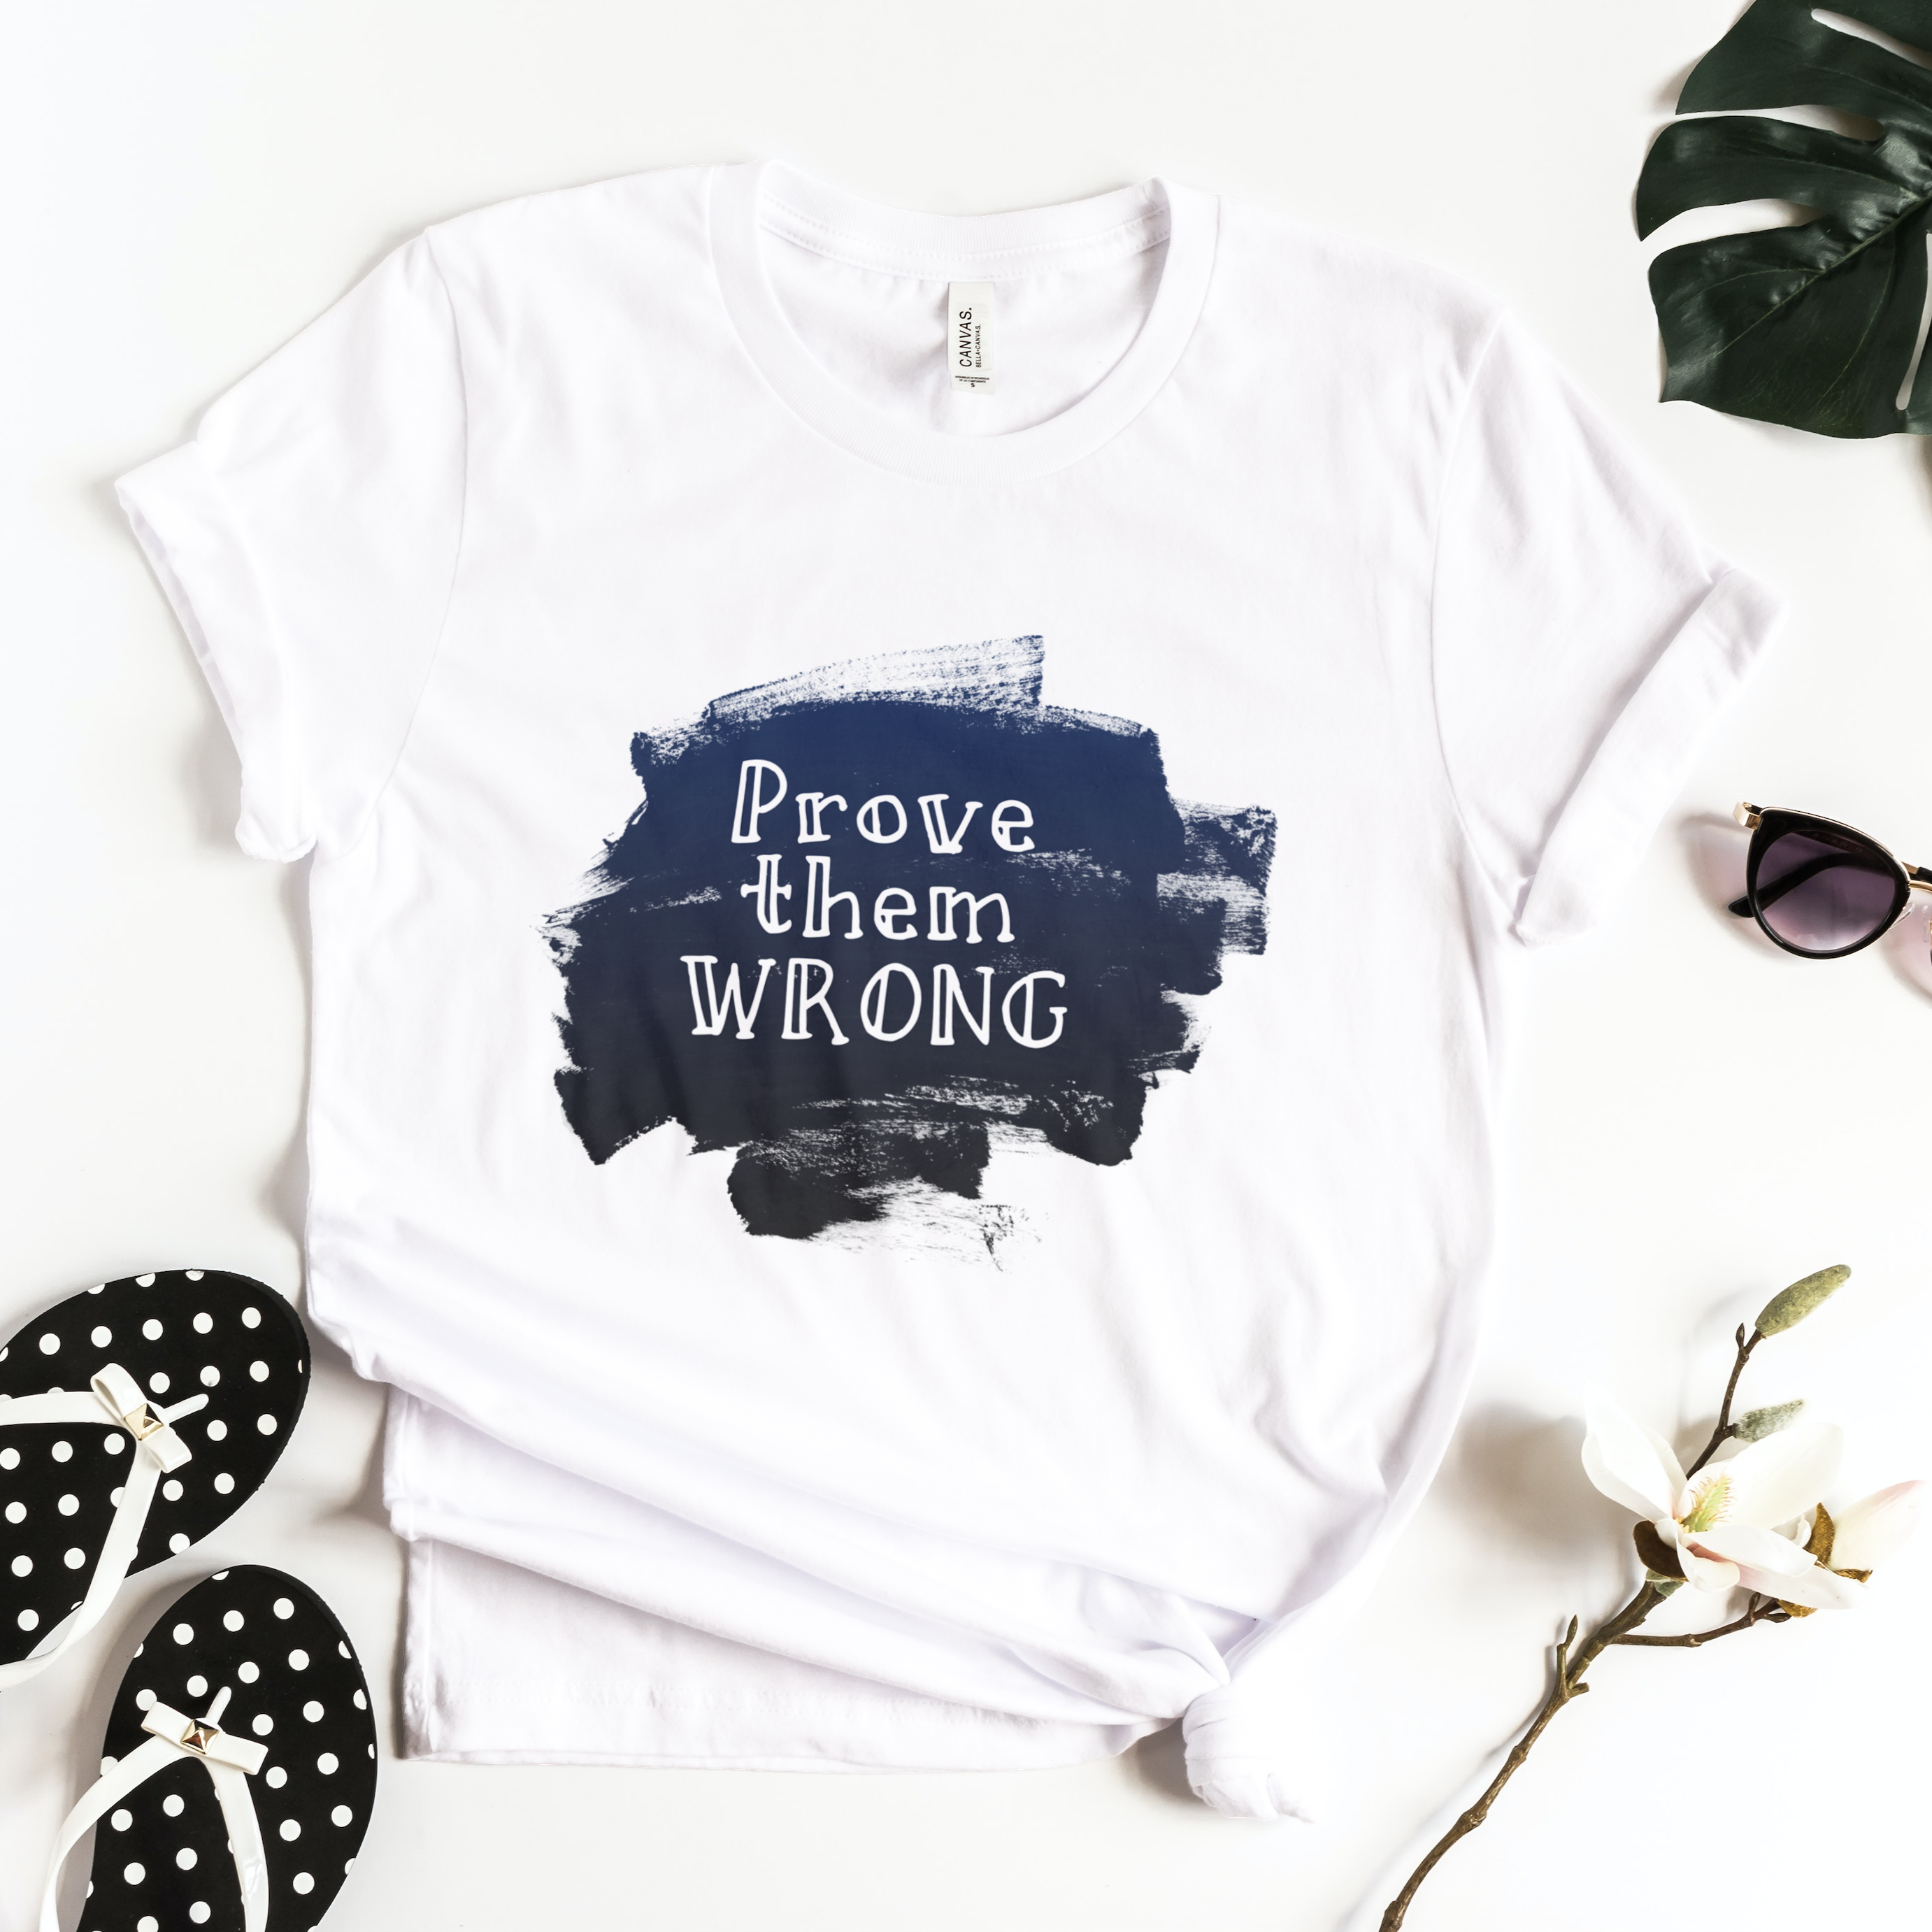 Story of Awakening Lifestyle Community Spirituality Relationships Love Light Meditation Oneness Earth Balance Healing Shop Store Charity Tree Nature Read Write T shirt Tops Tees Clothing Women Horoscope Prove Them Wrong Quote